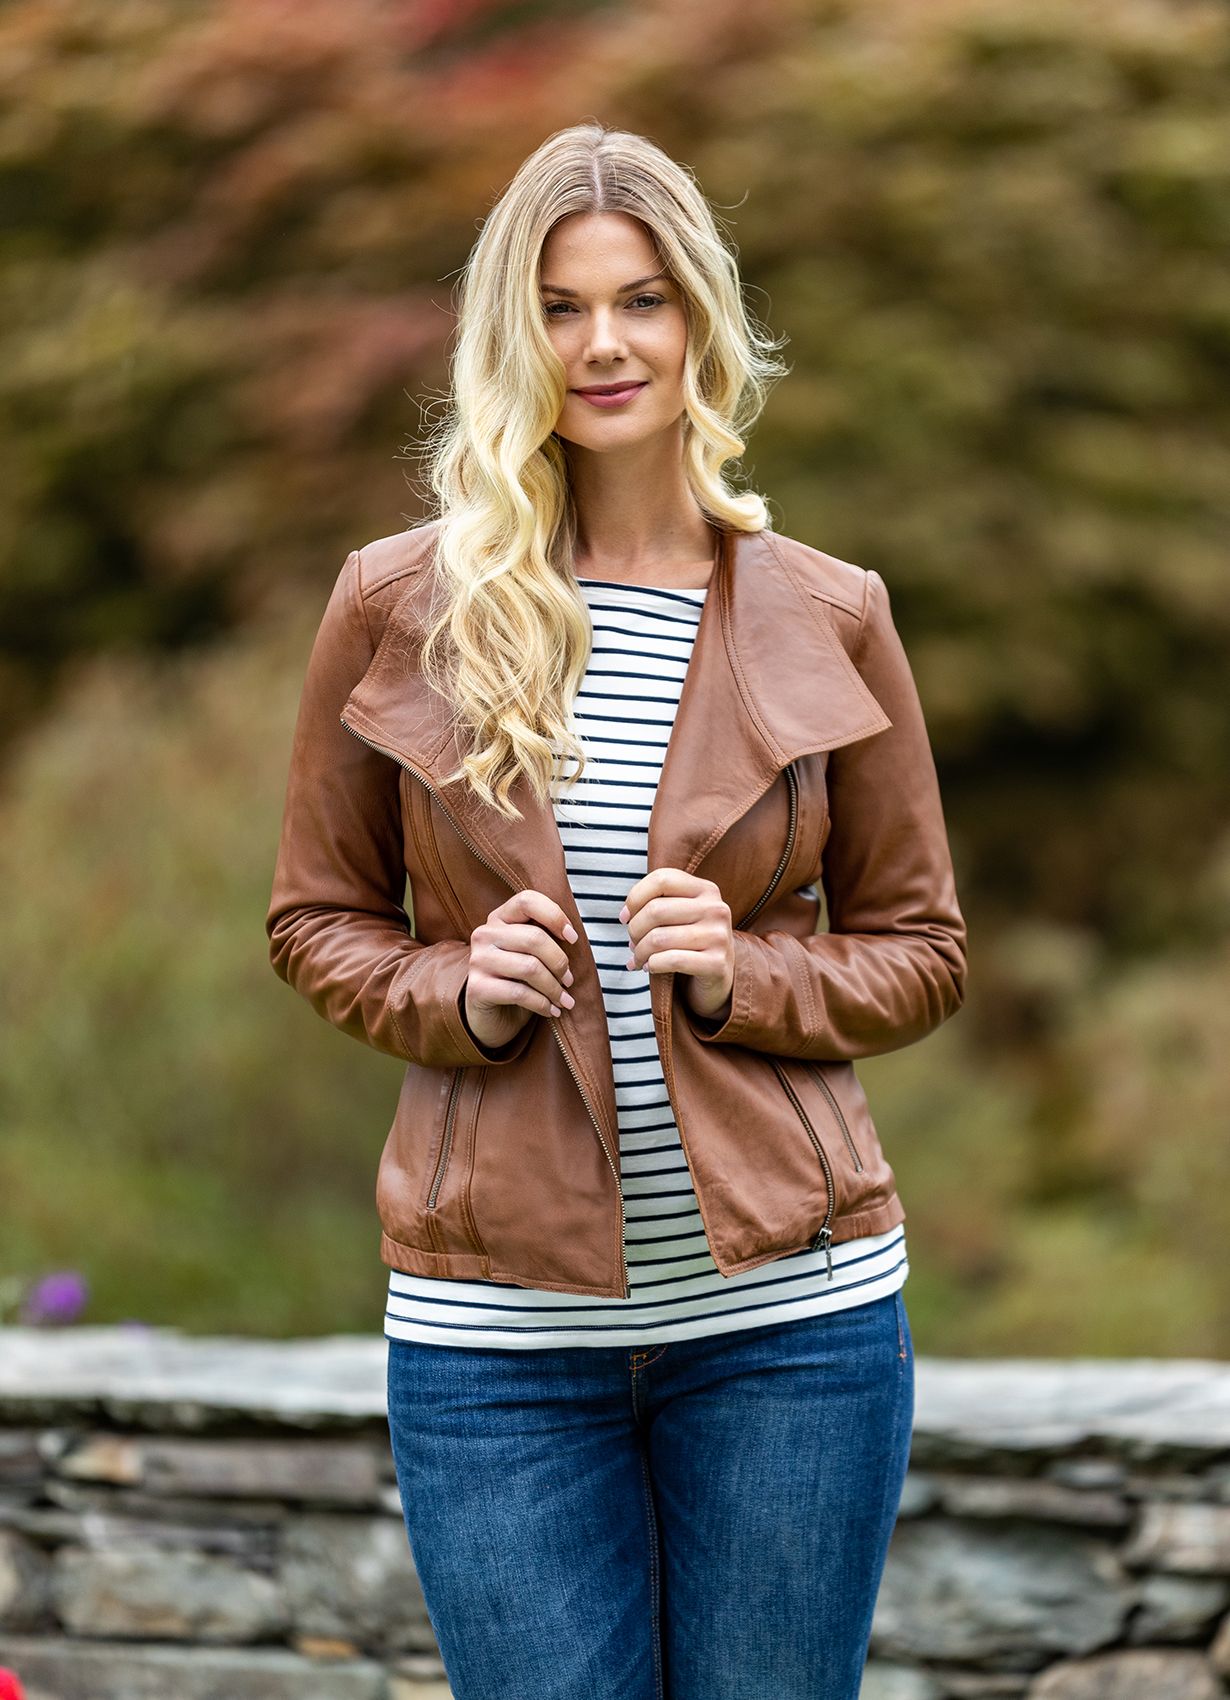 Inject instant style into your wardrobe with our Jill leather biker jacket in tan. The Jill is a style that returns year after year in new colourways. It's a best-selling style for a reason. The casual cut and slightly longer length accommodates all shapes and sizes. The larger collar is incredibly flattering with subtle design features that create the perfect casual biker jacket look.  Expertly crafted from soft and supple aniline leather, Jill is practical as well as stylish. The ever on-trend biker jacket features definitive details such as an asymmetric zip and two zip pockets with brushed metallic detailing.